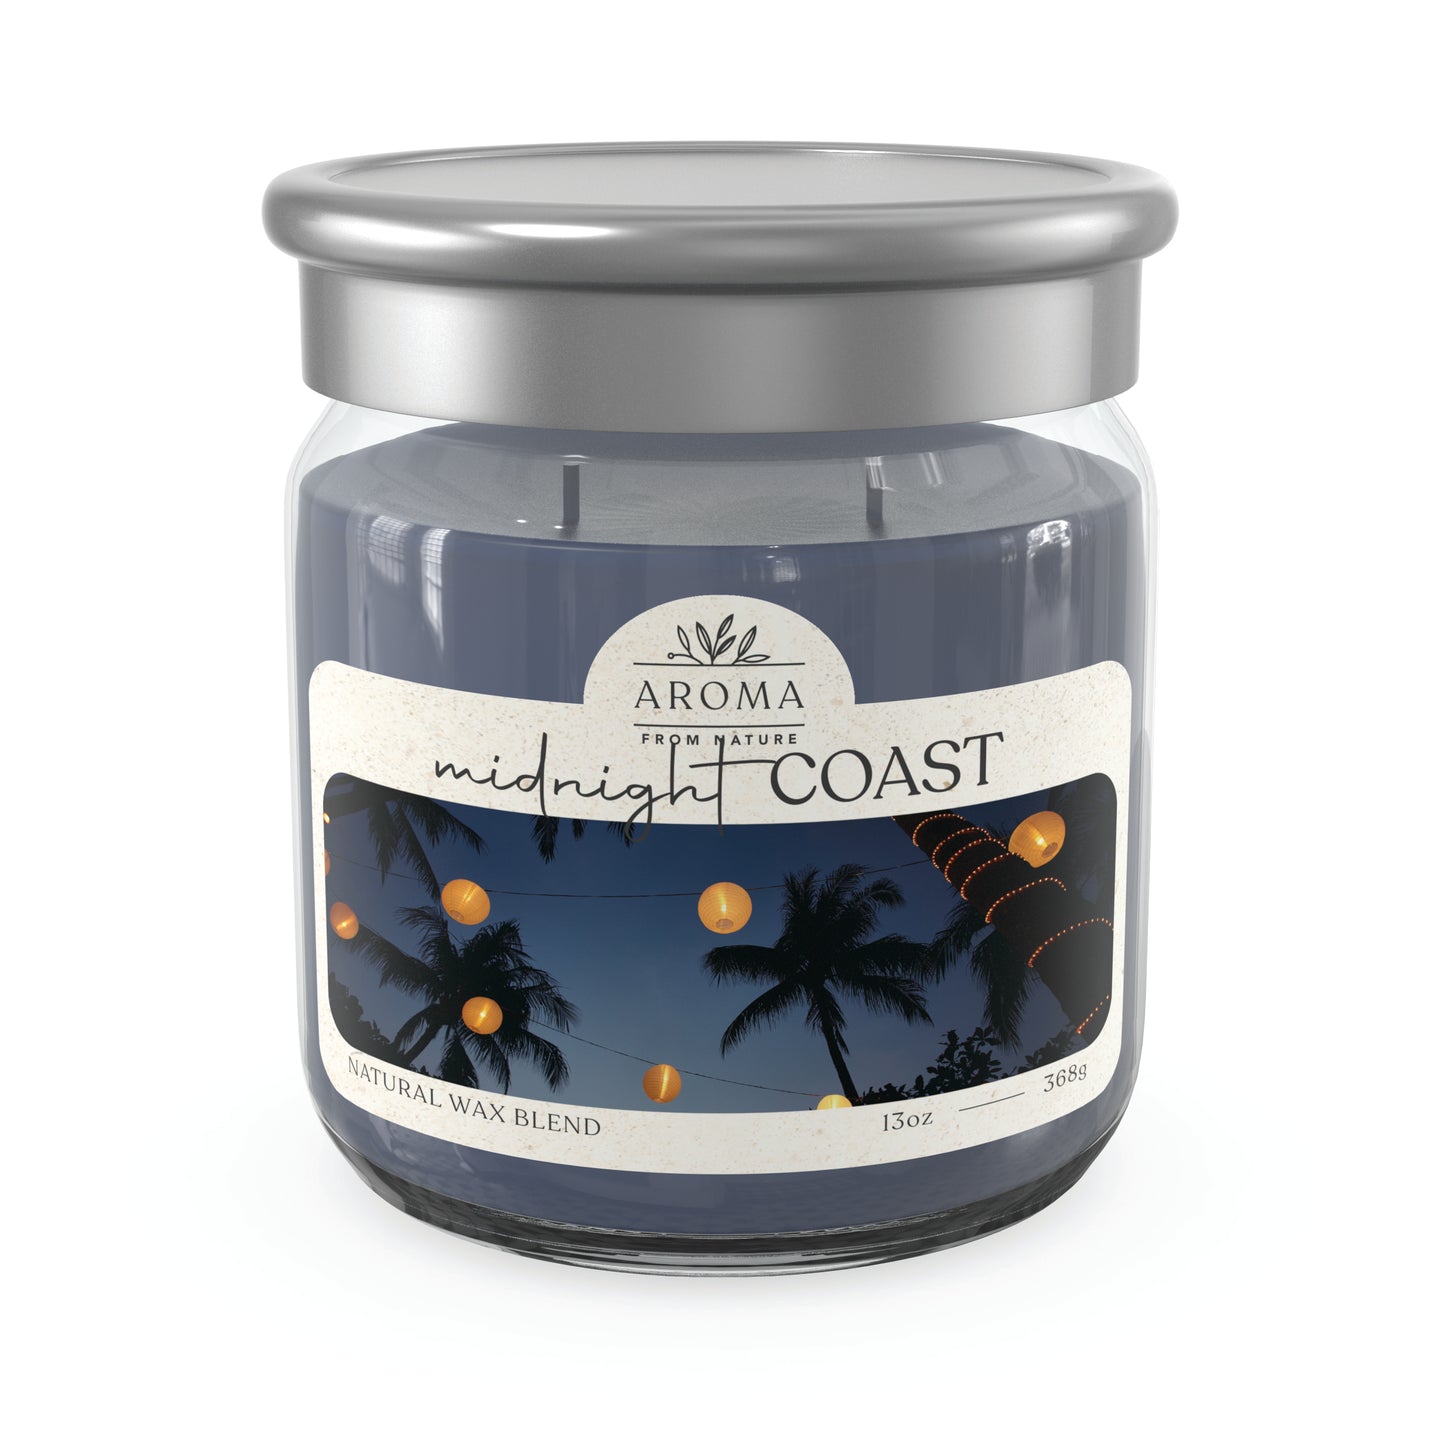 Aroma From Nature - 13 oz Scented Wax - Midnigth Coast